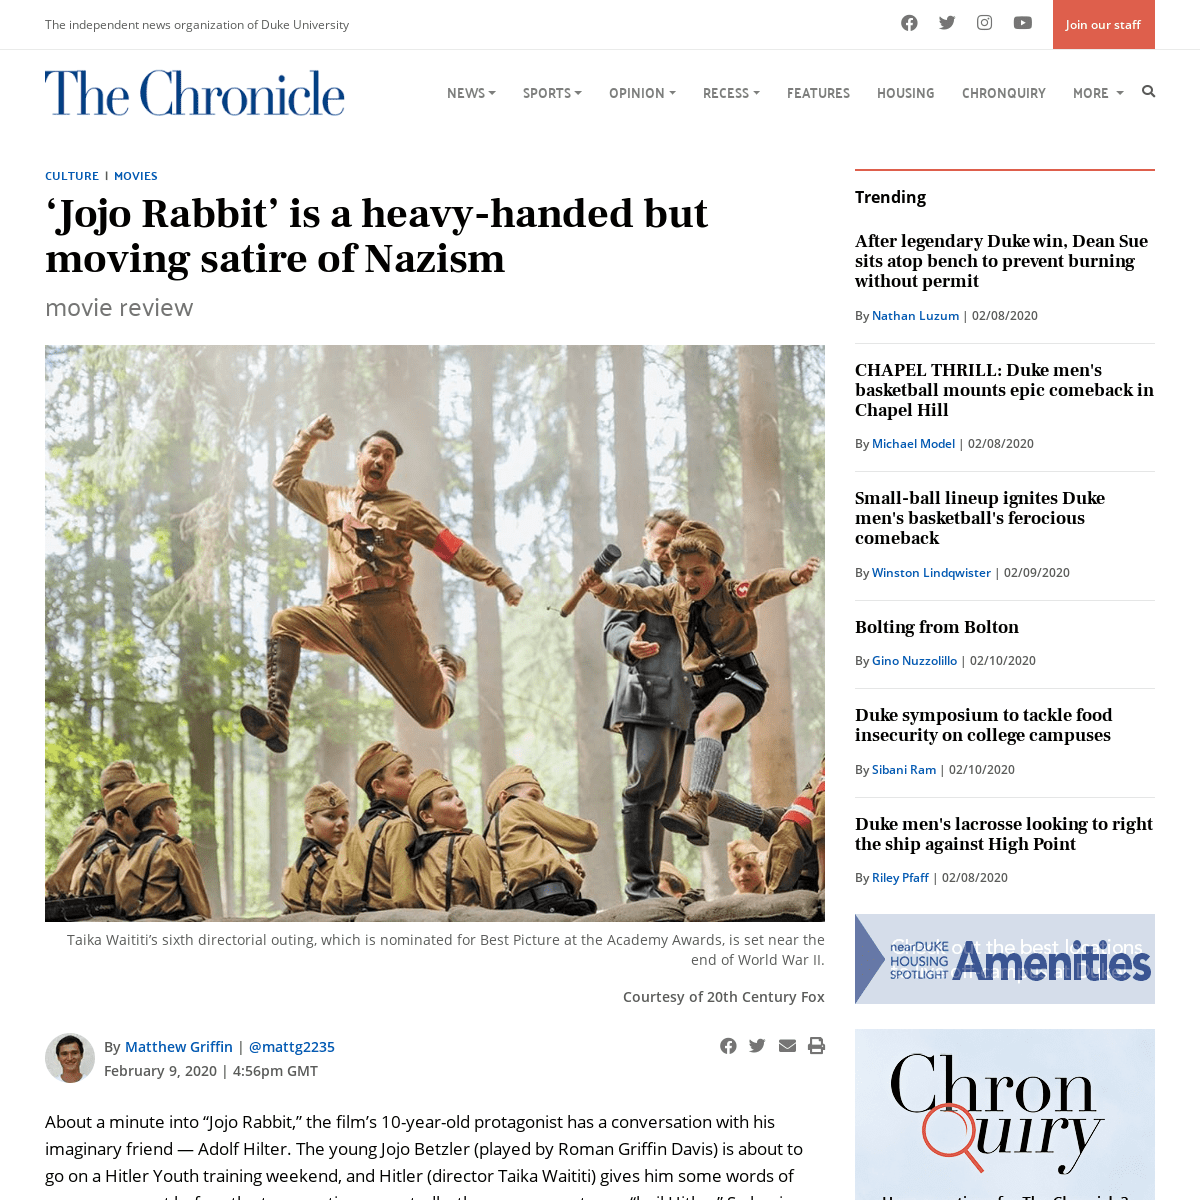 A complete backup of www.dukechronicle.com/article/2020/02/jojo-rabbit-is-a-heavy-handed-but-moving-satire-of-nazism